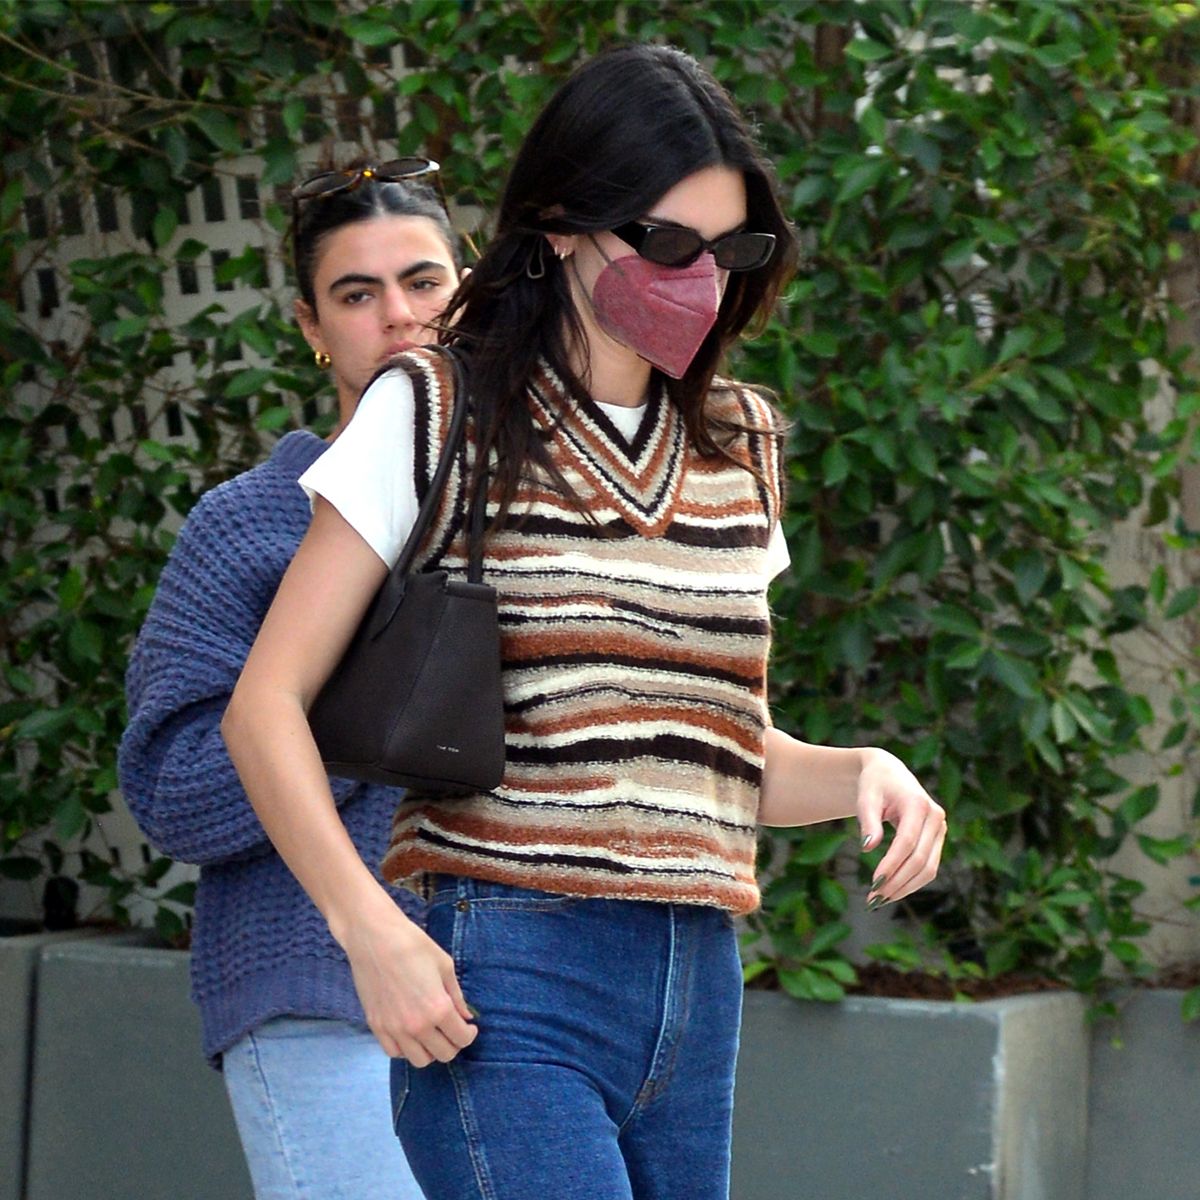 Kendall Jenner cuts a casual figure in an oversized blue jumper as